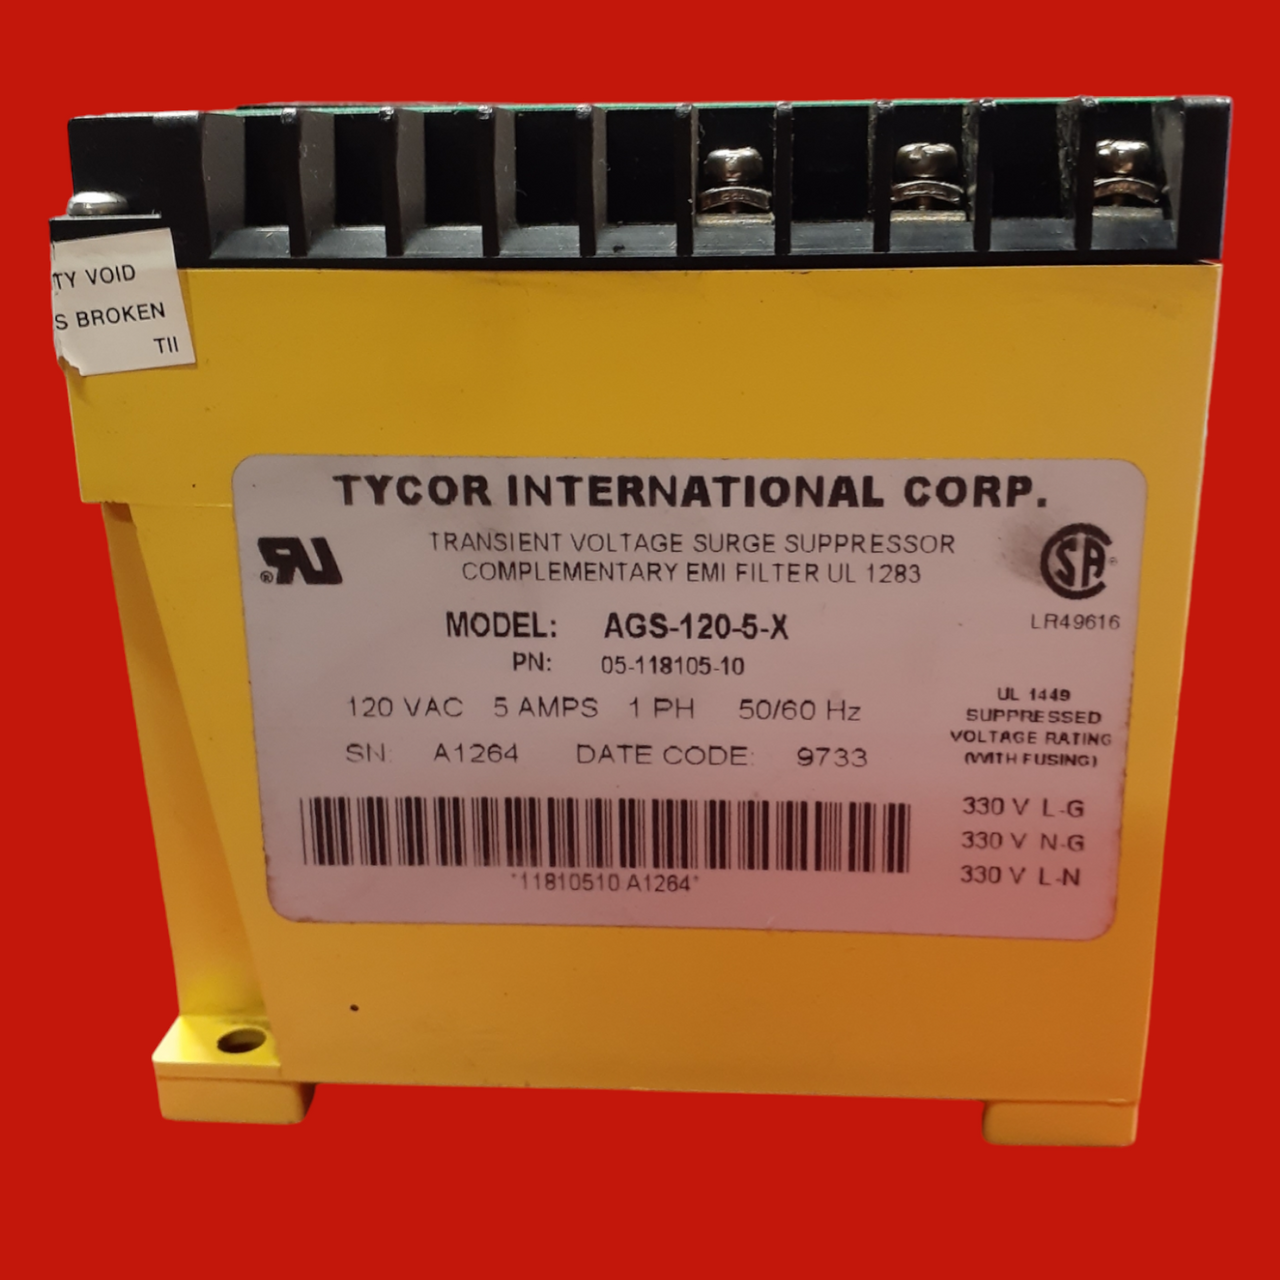 Tycor International Corp. Transient Voltage Surge Suppressor, AGS-120-5-X